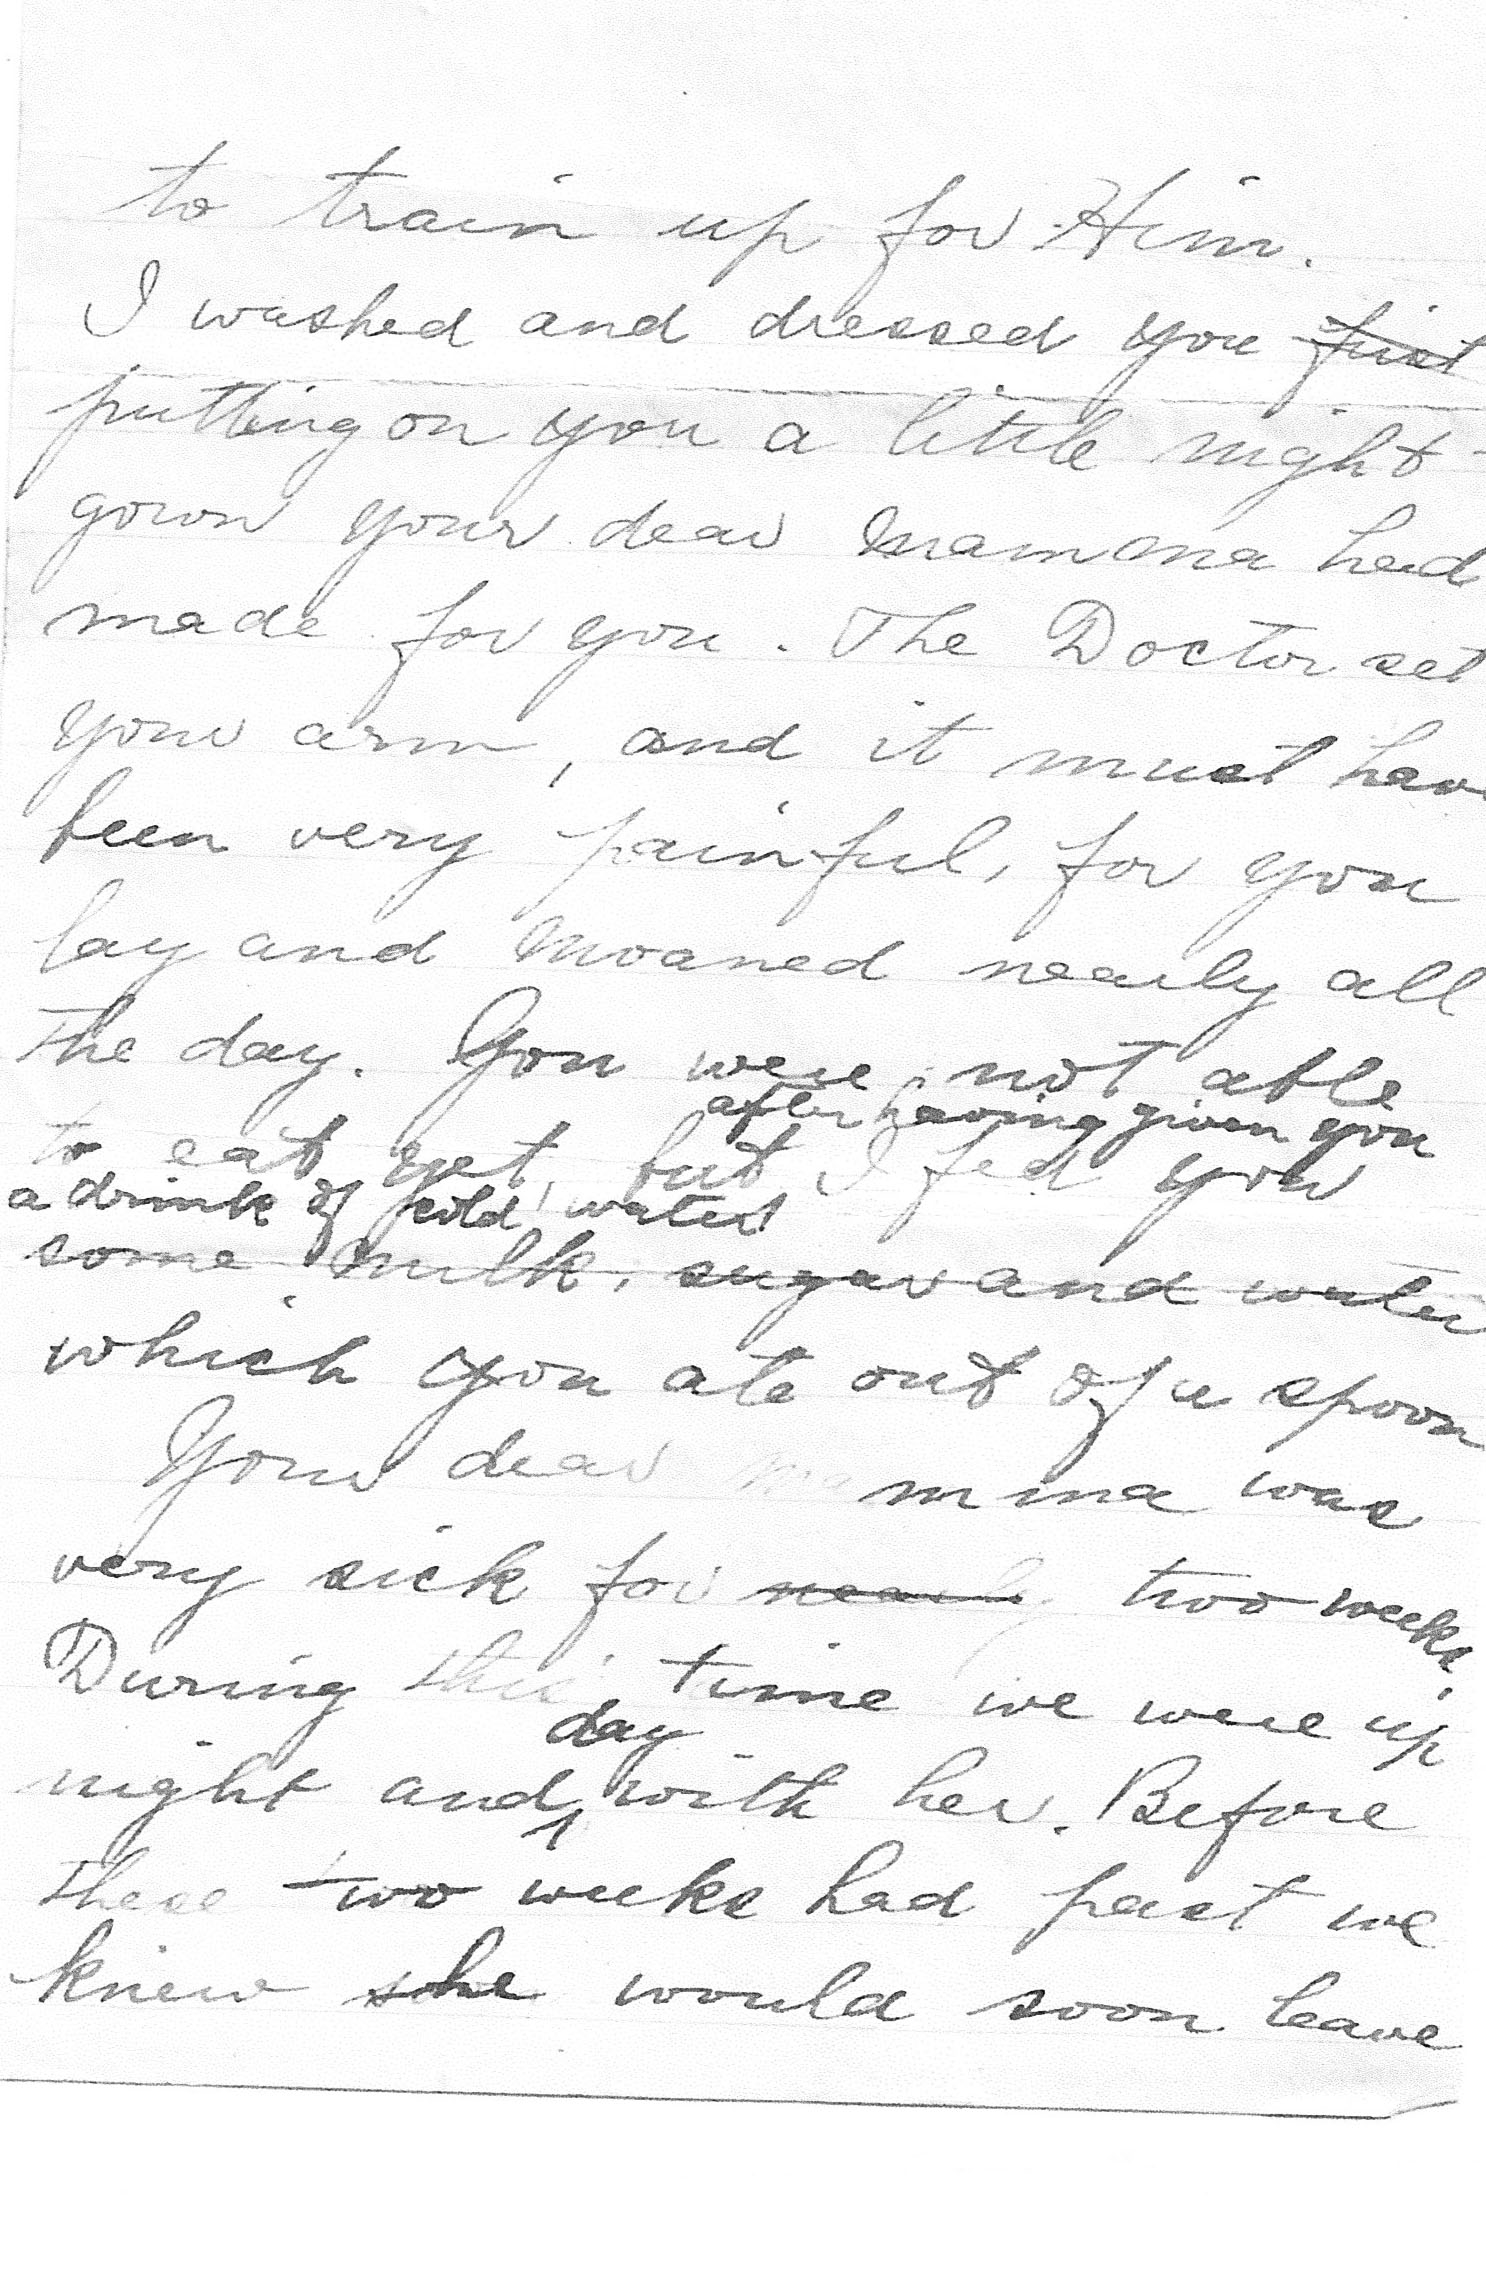 Letter to Horace page 2